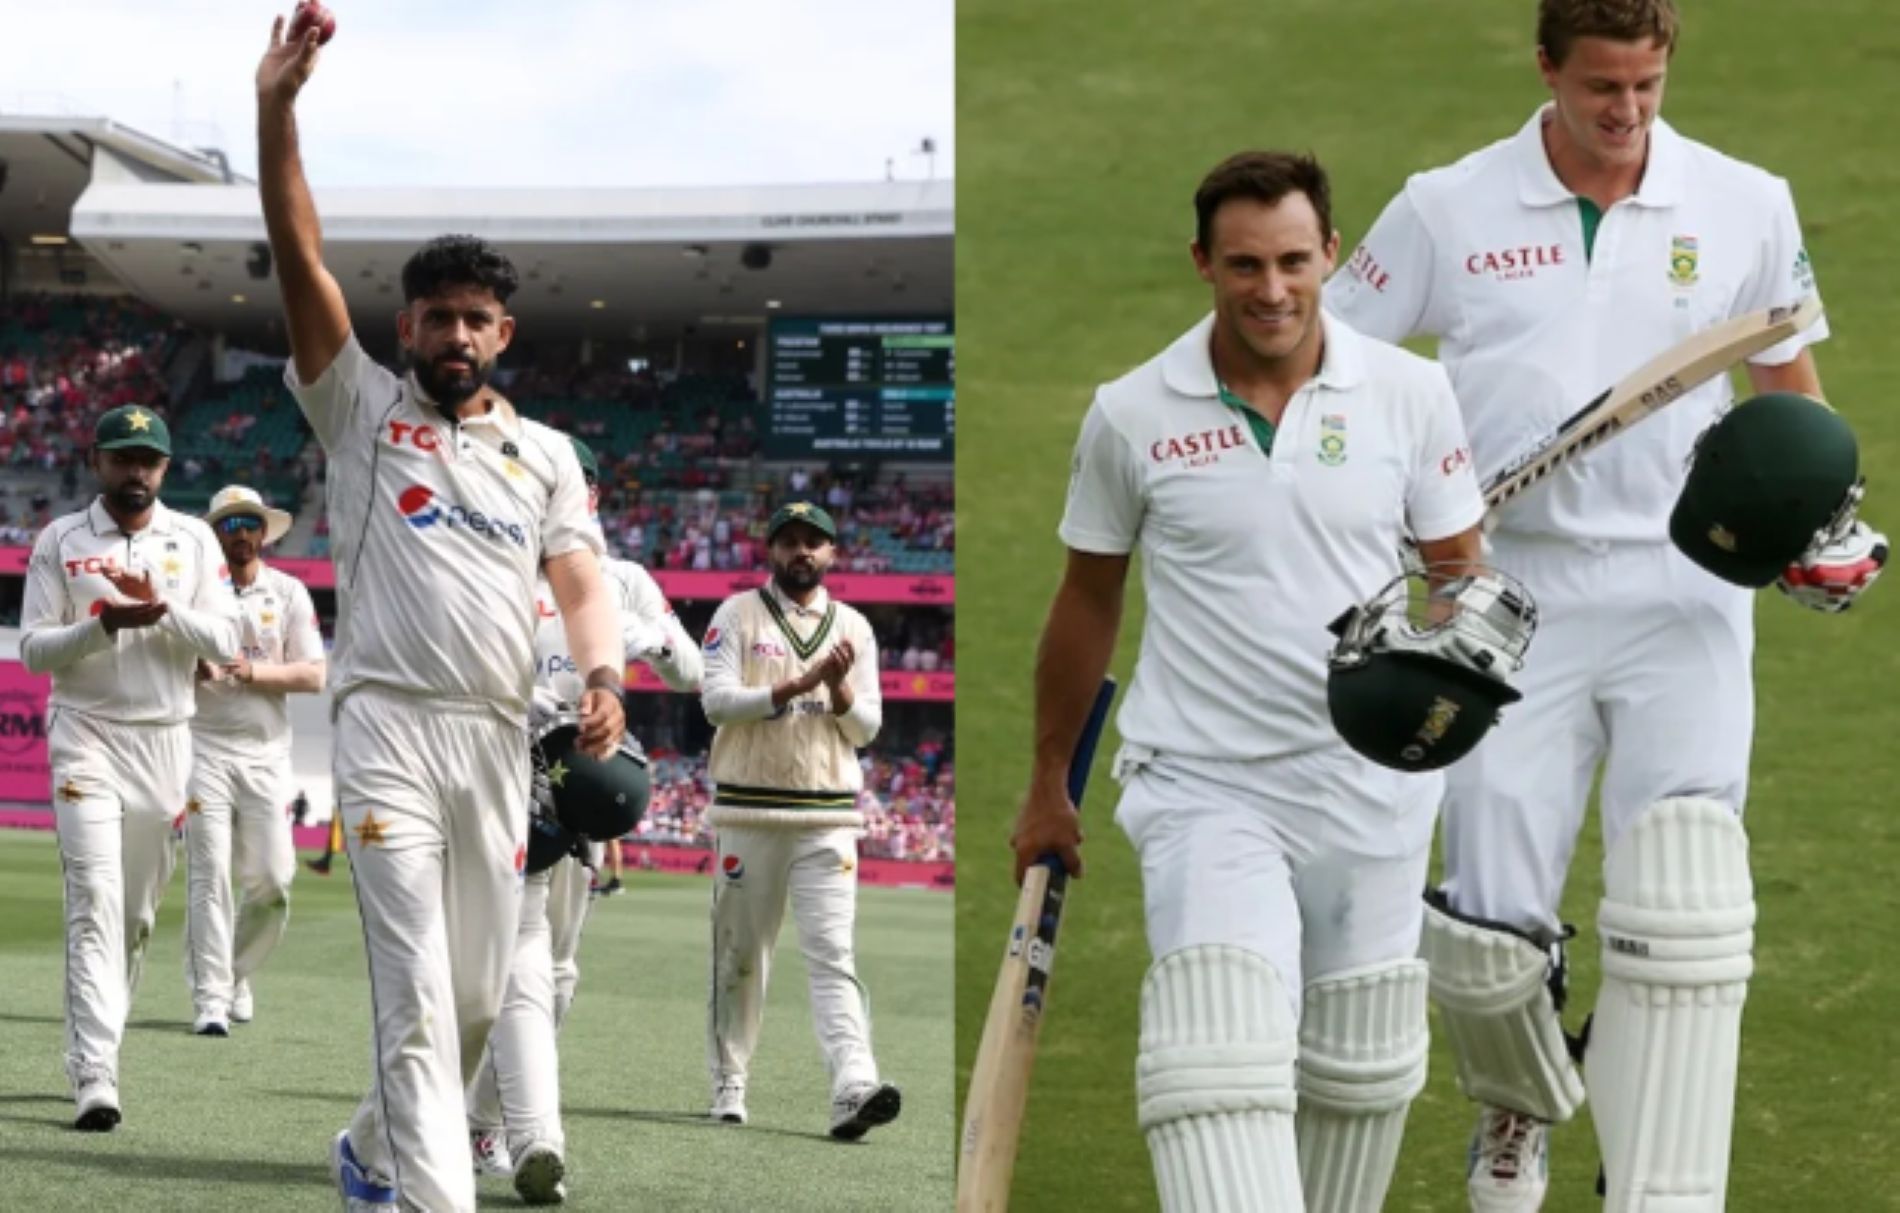 There have been some heroic performances by debutants down under